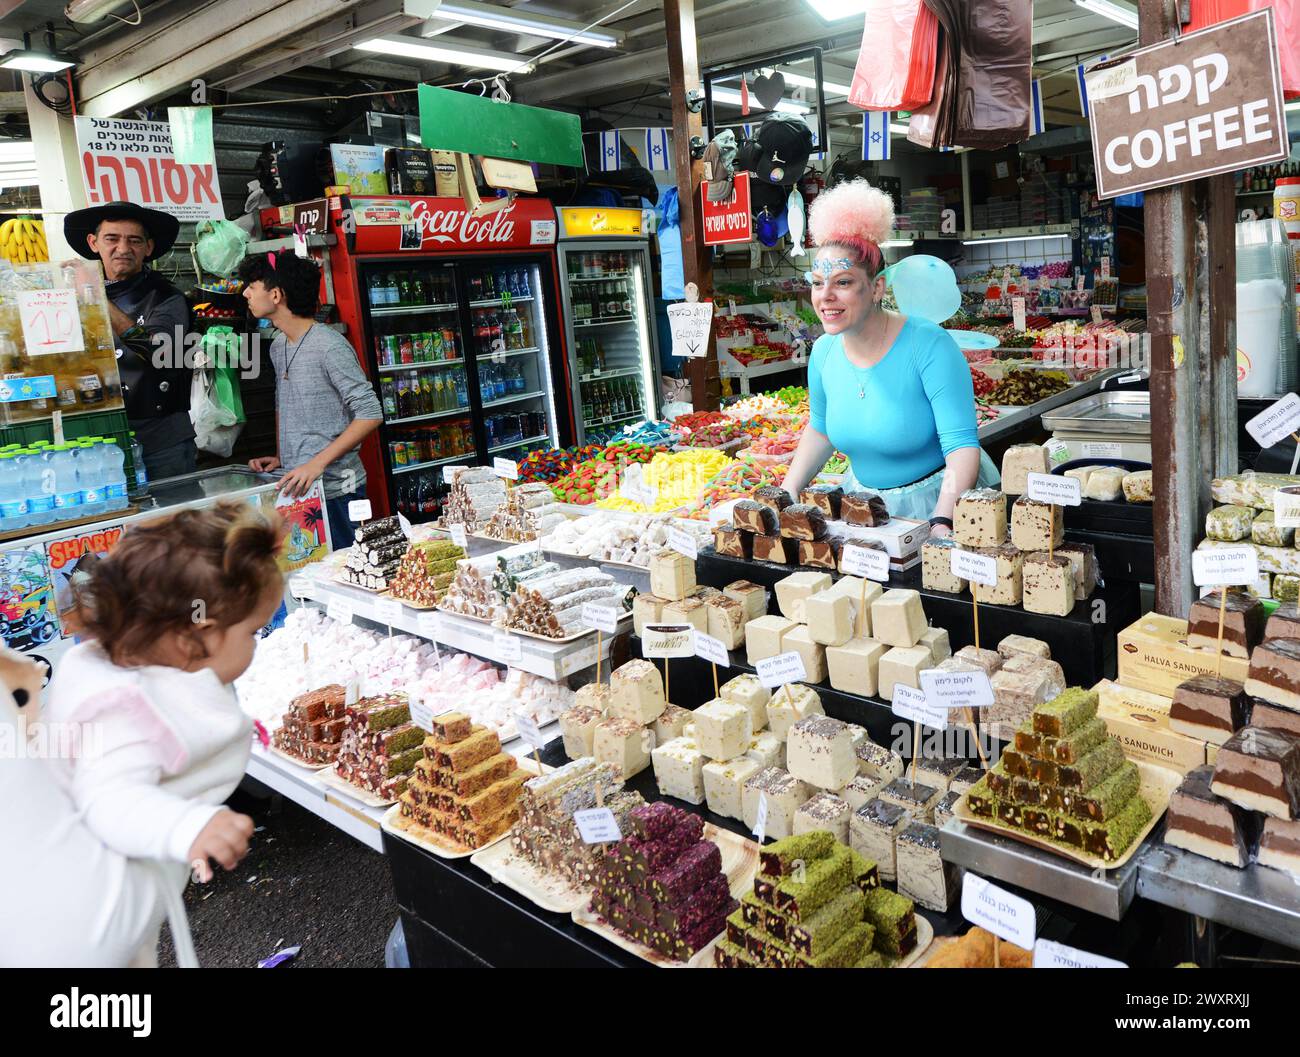 A confectionery vendor selling Halva, Turkish Delight and other sweets at the Carmel market in Tel-Aviv, Israel. Stock Photo